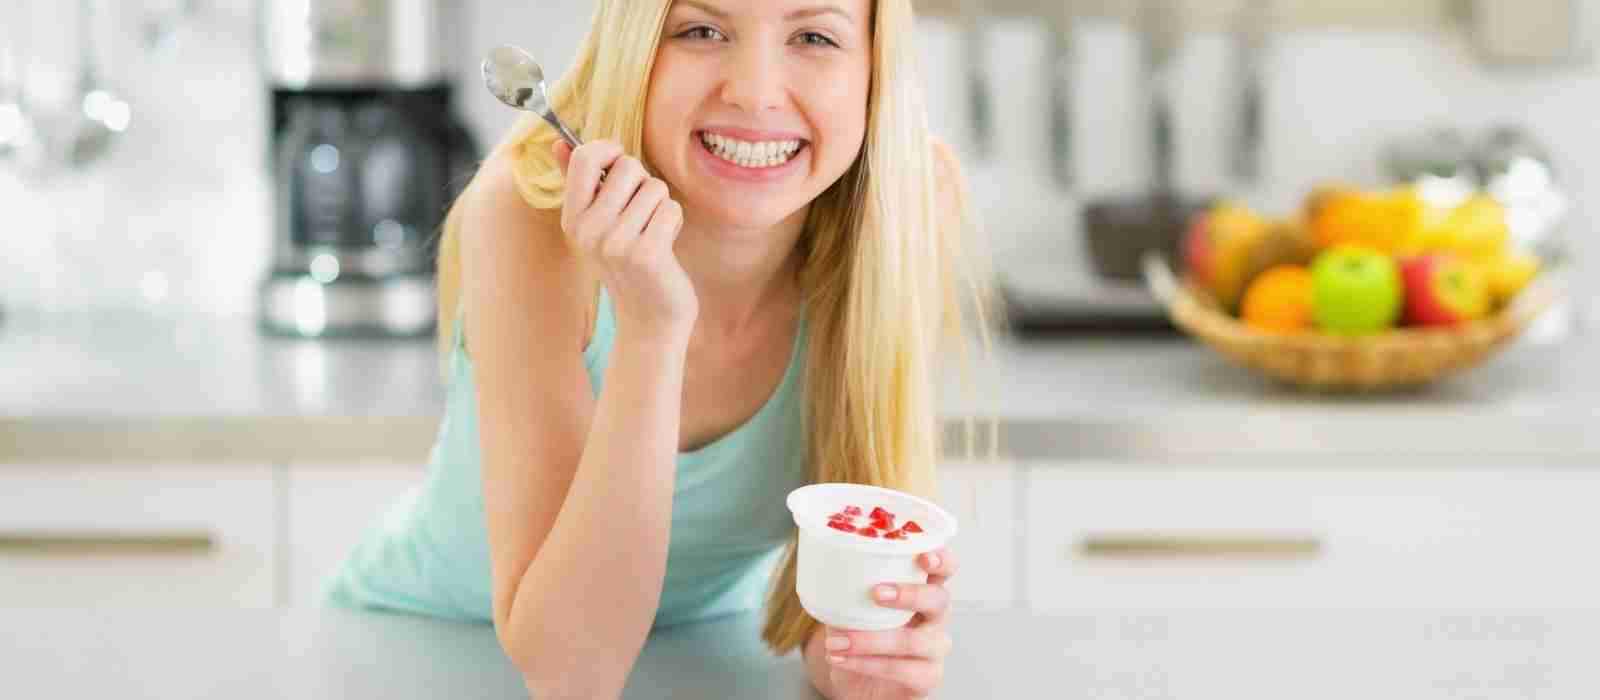 Can I Eat Yogurt While Breastfeeding: The Benefits for You and Your Baby